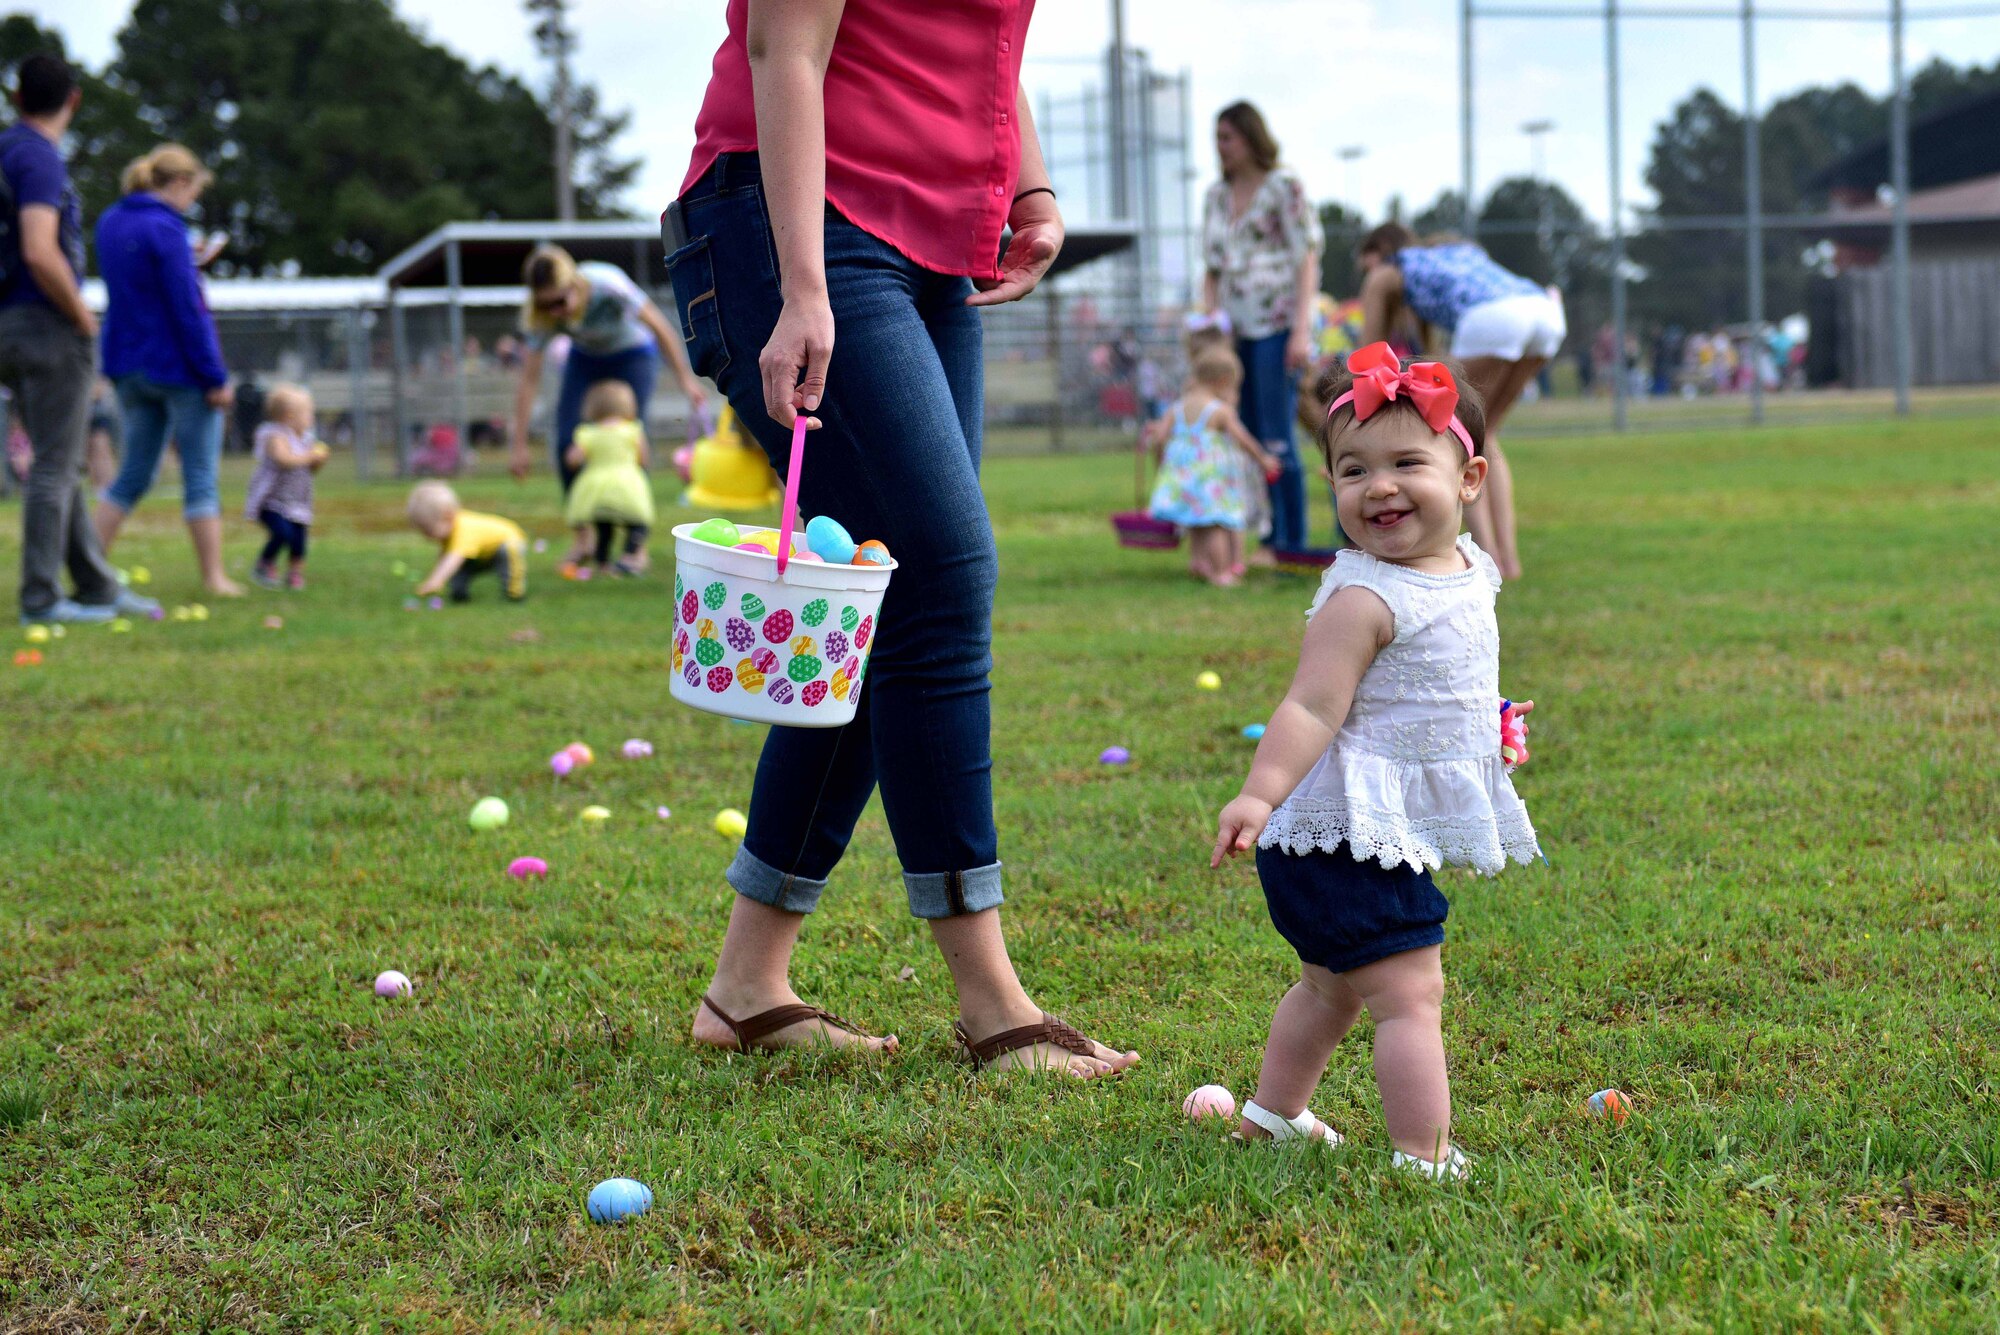 A young girl walks around a field full of Easter eggs.